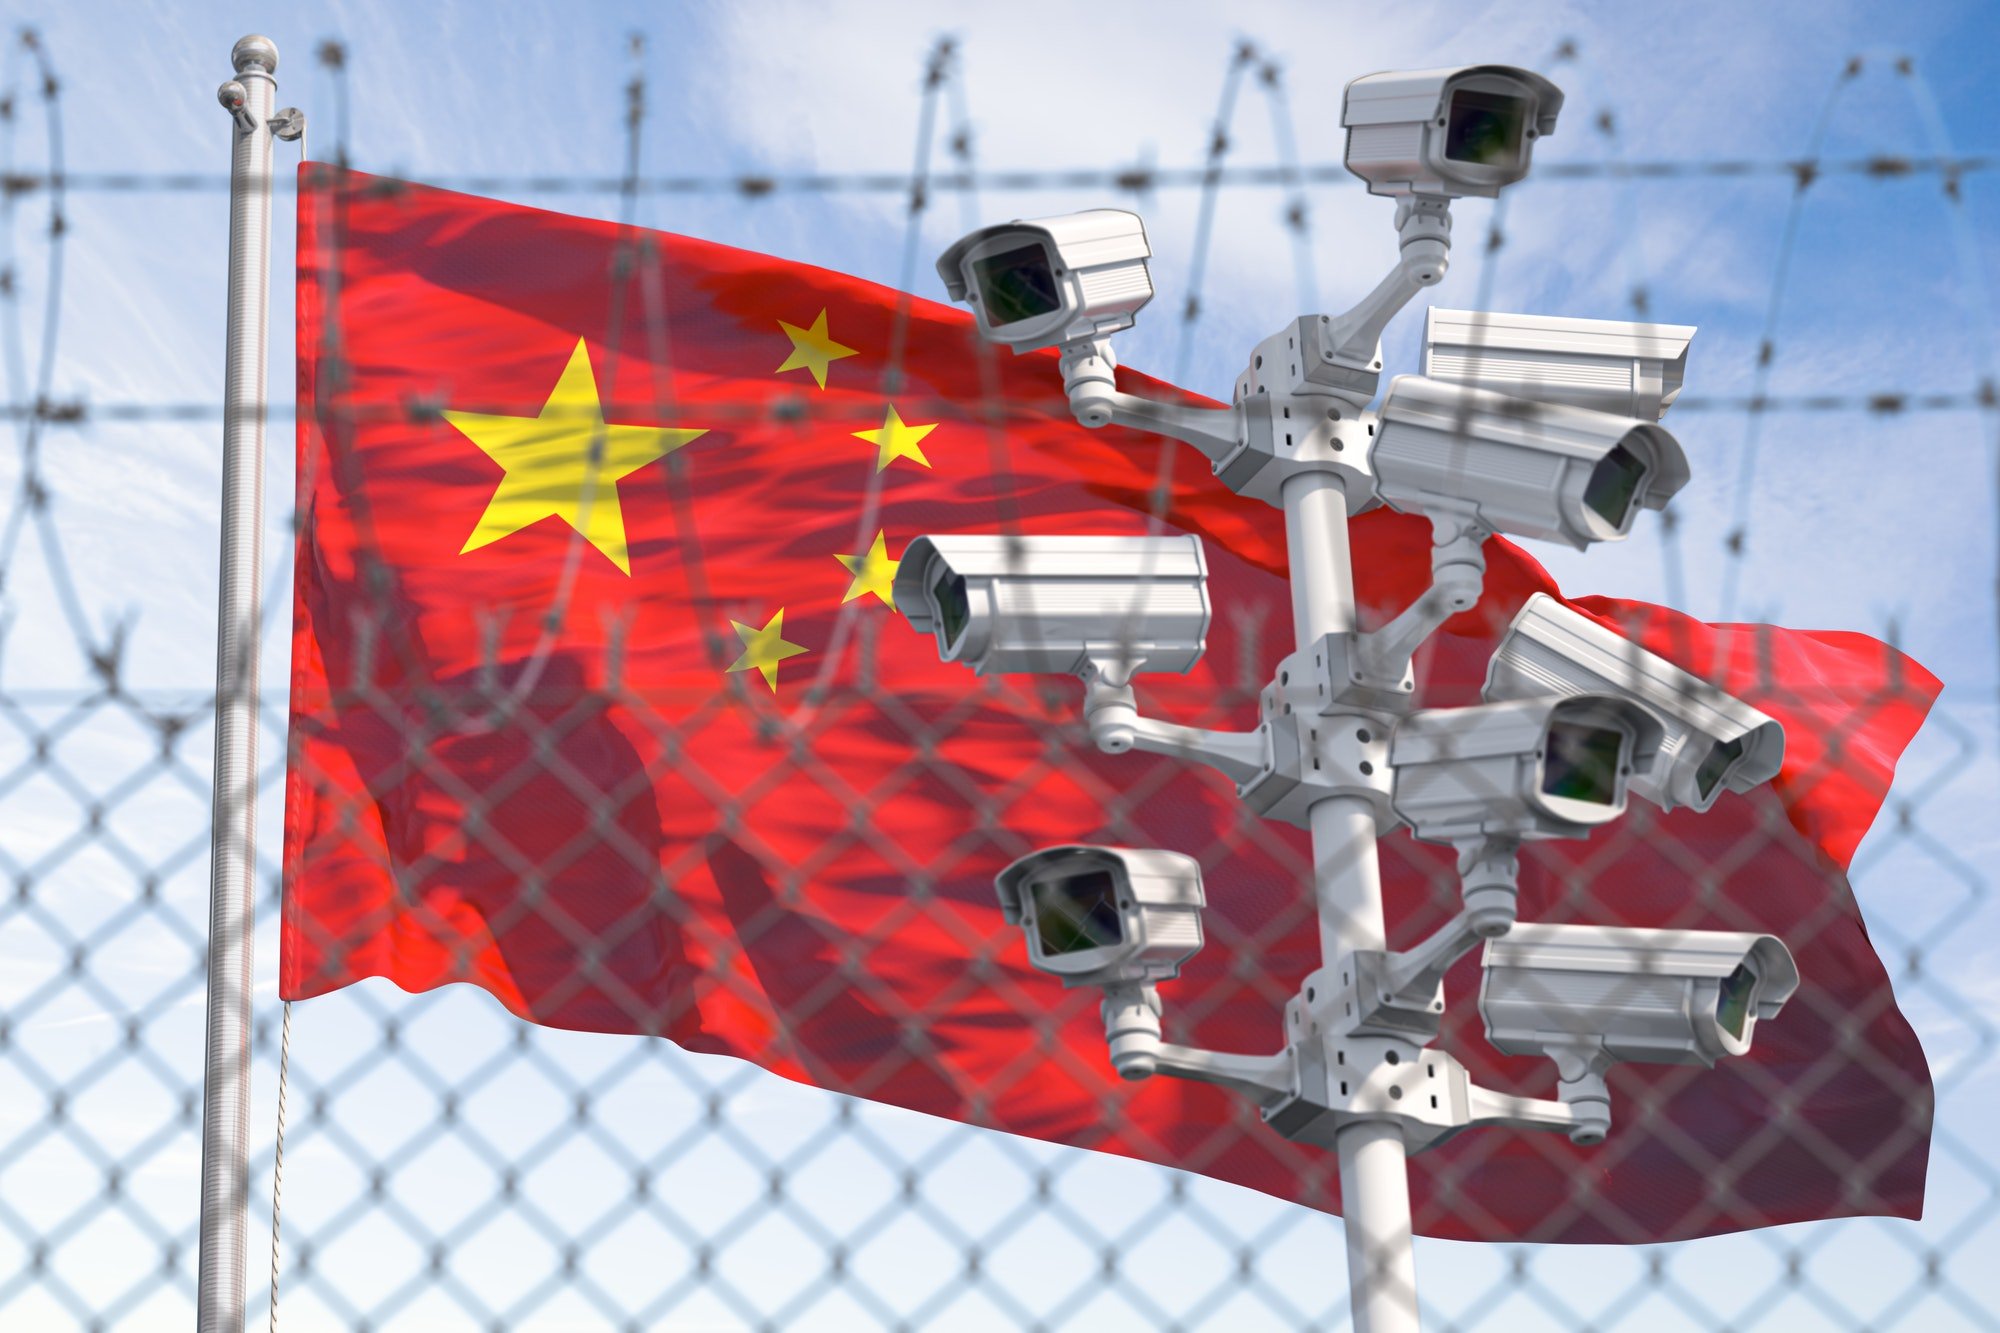 Flag of China behind barbed wire fence and cctv cameras.